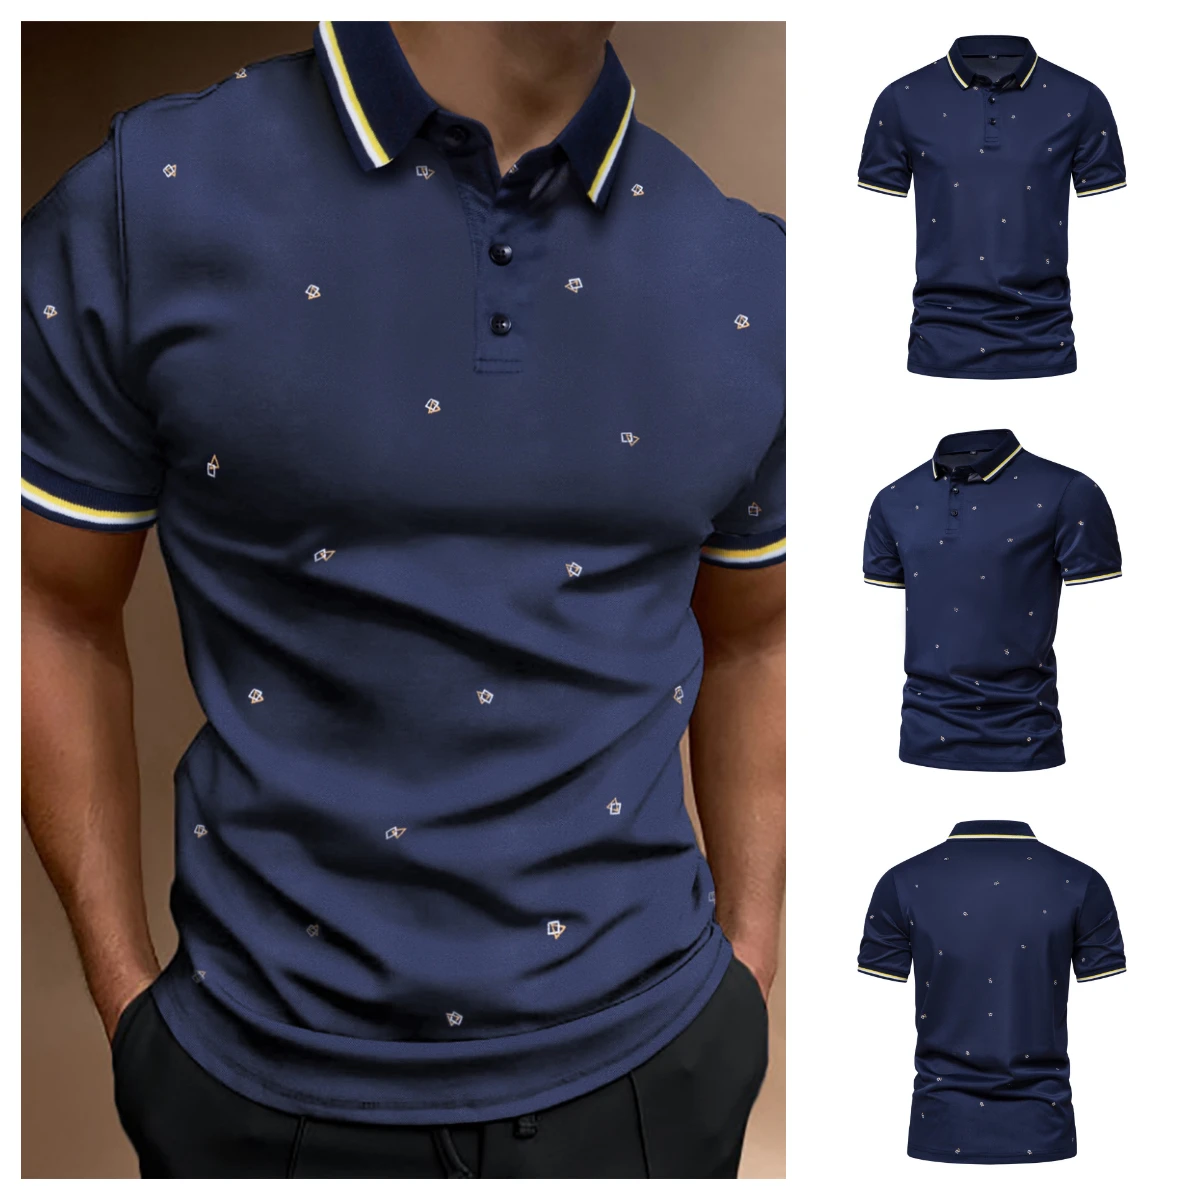 

2023 Summer Men's New POLO T-shirt Stripe Contrast Half Open Neck T-shirts Casual Print Breathable Short Sleeve Graphic Tees